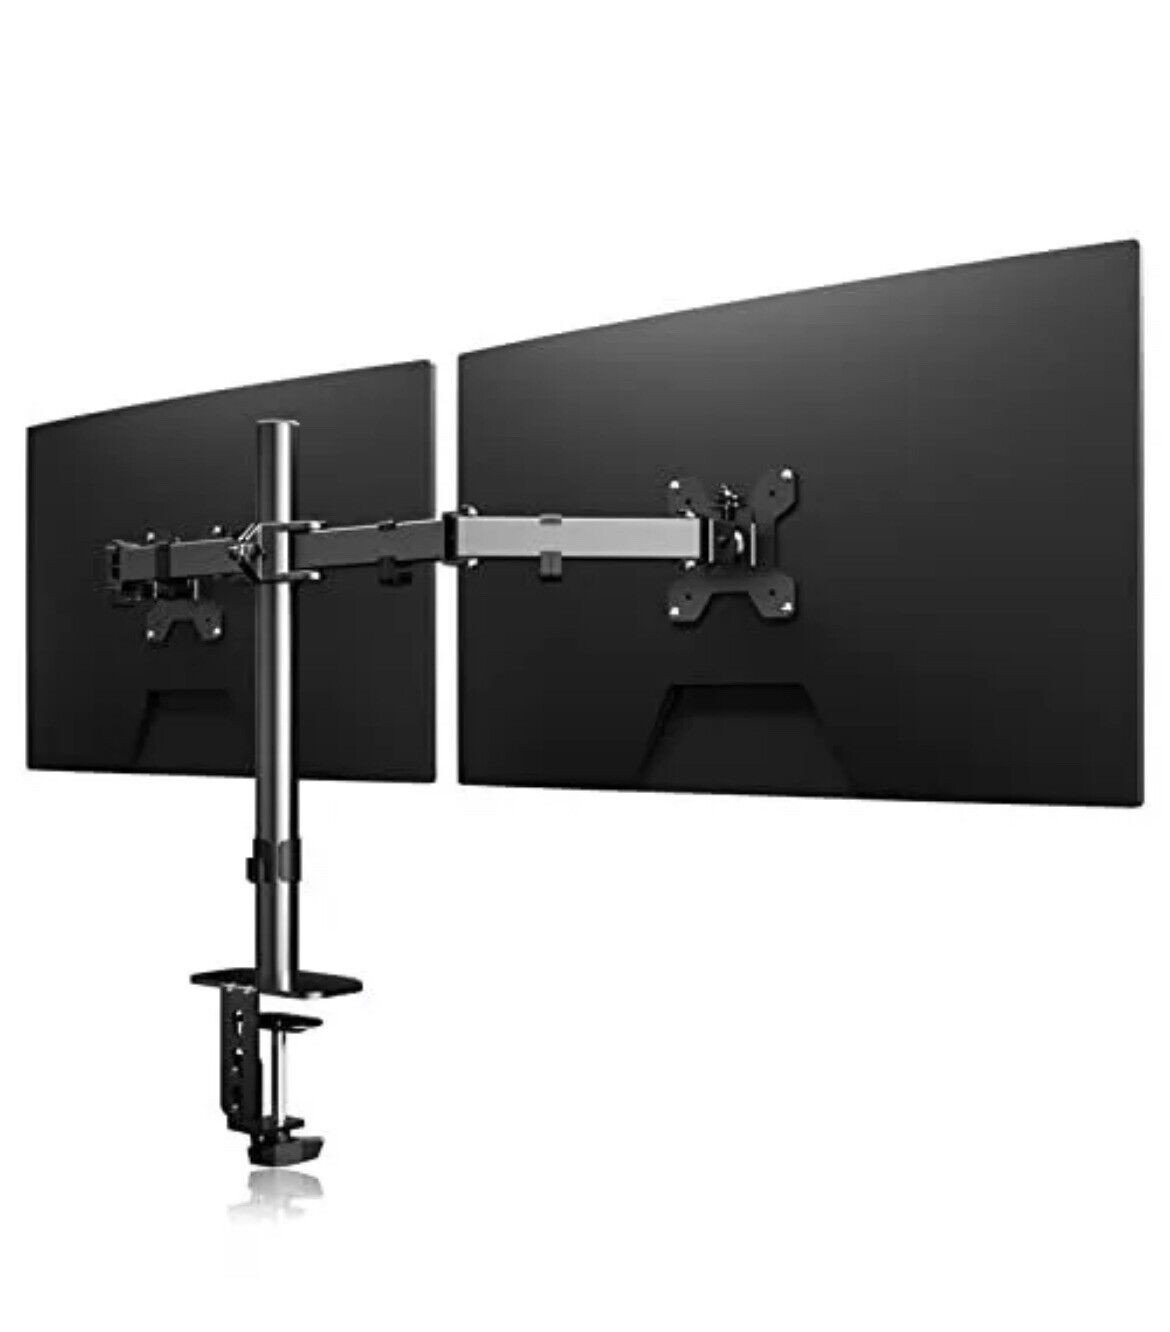 Suptek Dual LED LCD Monitor Desk Mount Heavy Duty Fully Adjustable Stand for ...